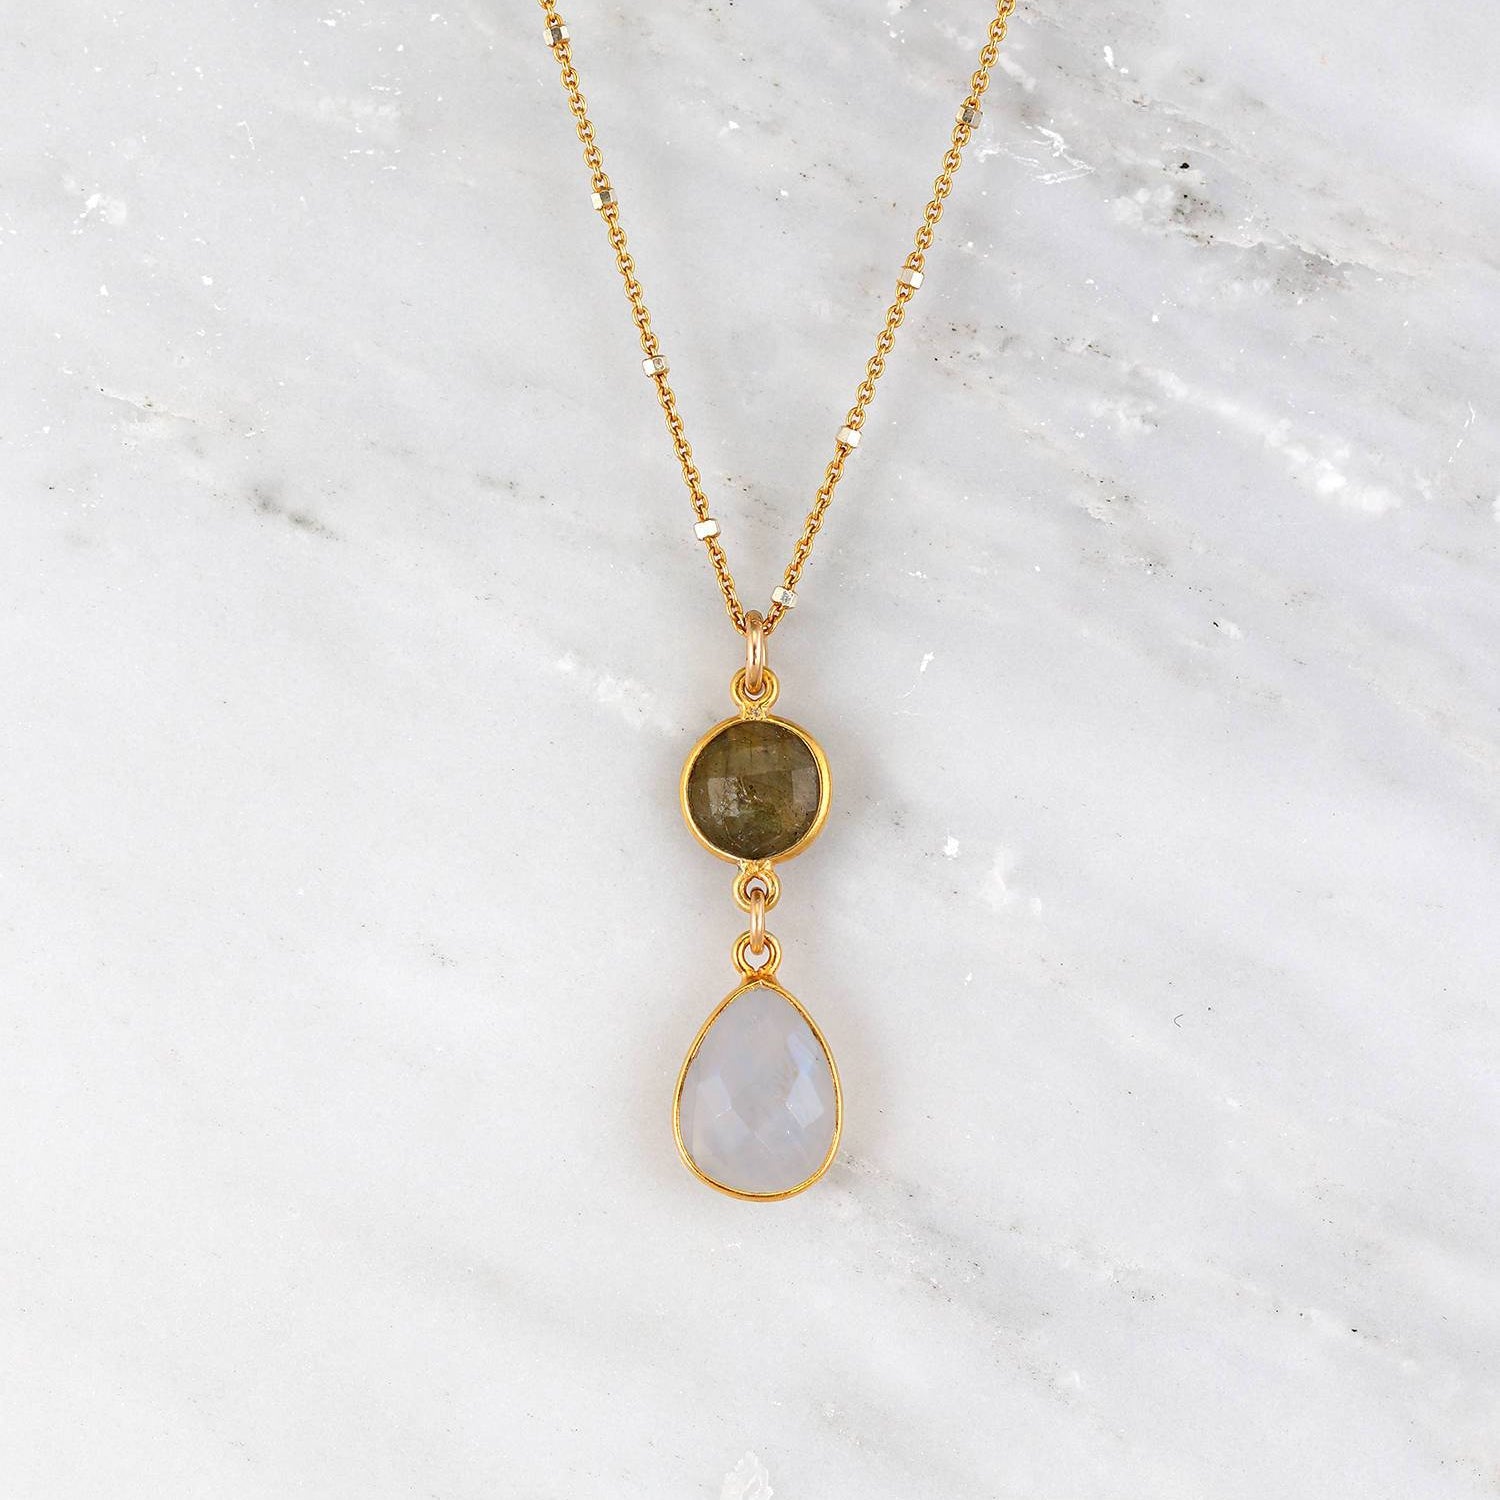 Rainbow Moonstone Necklace, Round Labradorite Chain Necklace, Gold silver Chain, Delicate Pendent Necklace, Bridesmaid Necklace, Cute Gift